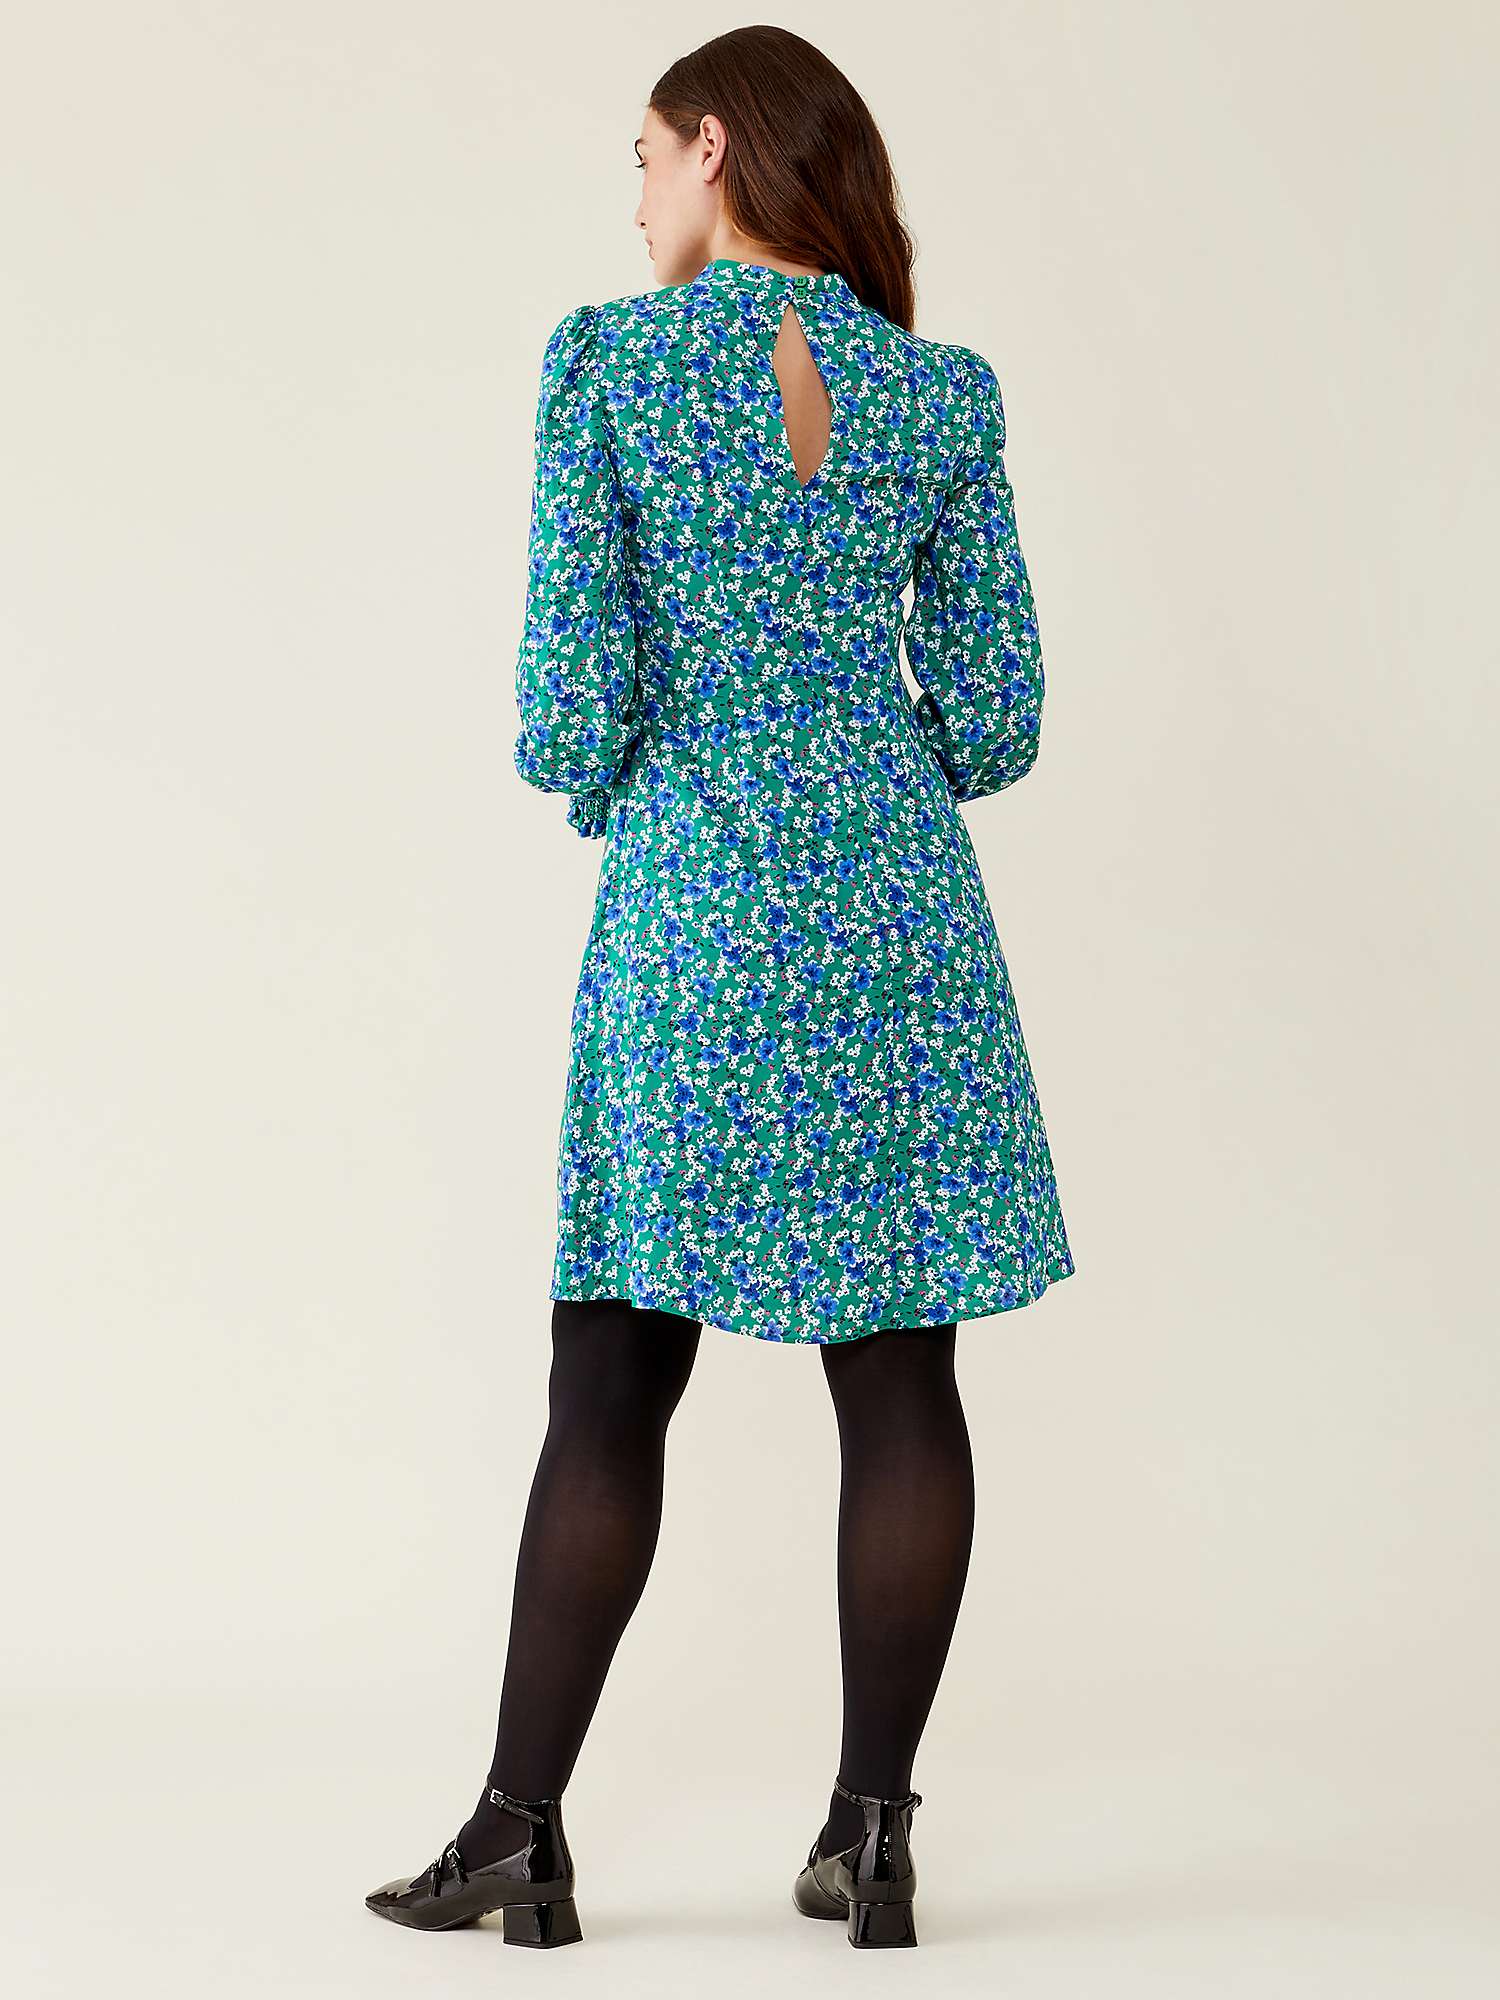 Finery Scattered Floral Print Dress, Green/Multi at John Lewis & Partners